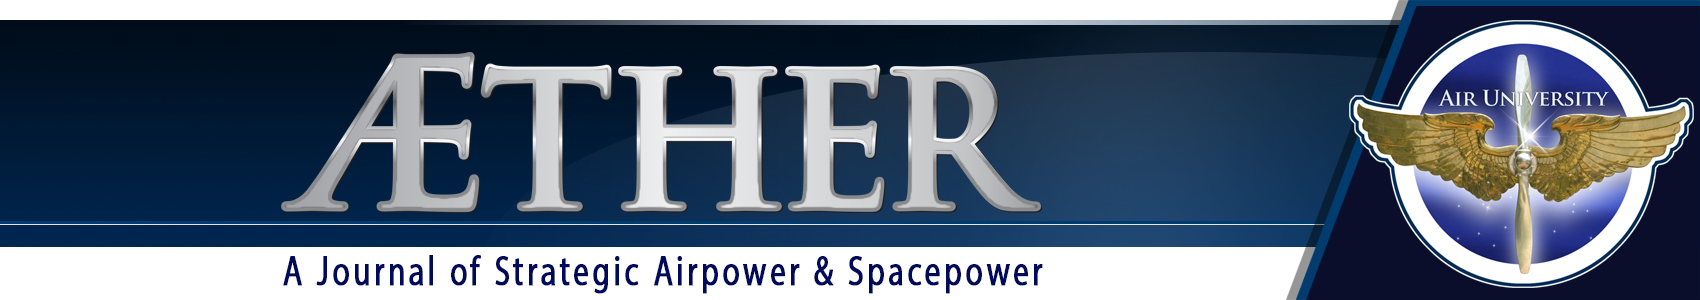 Æther: A Journal of Strategic Airpower & Spacepower